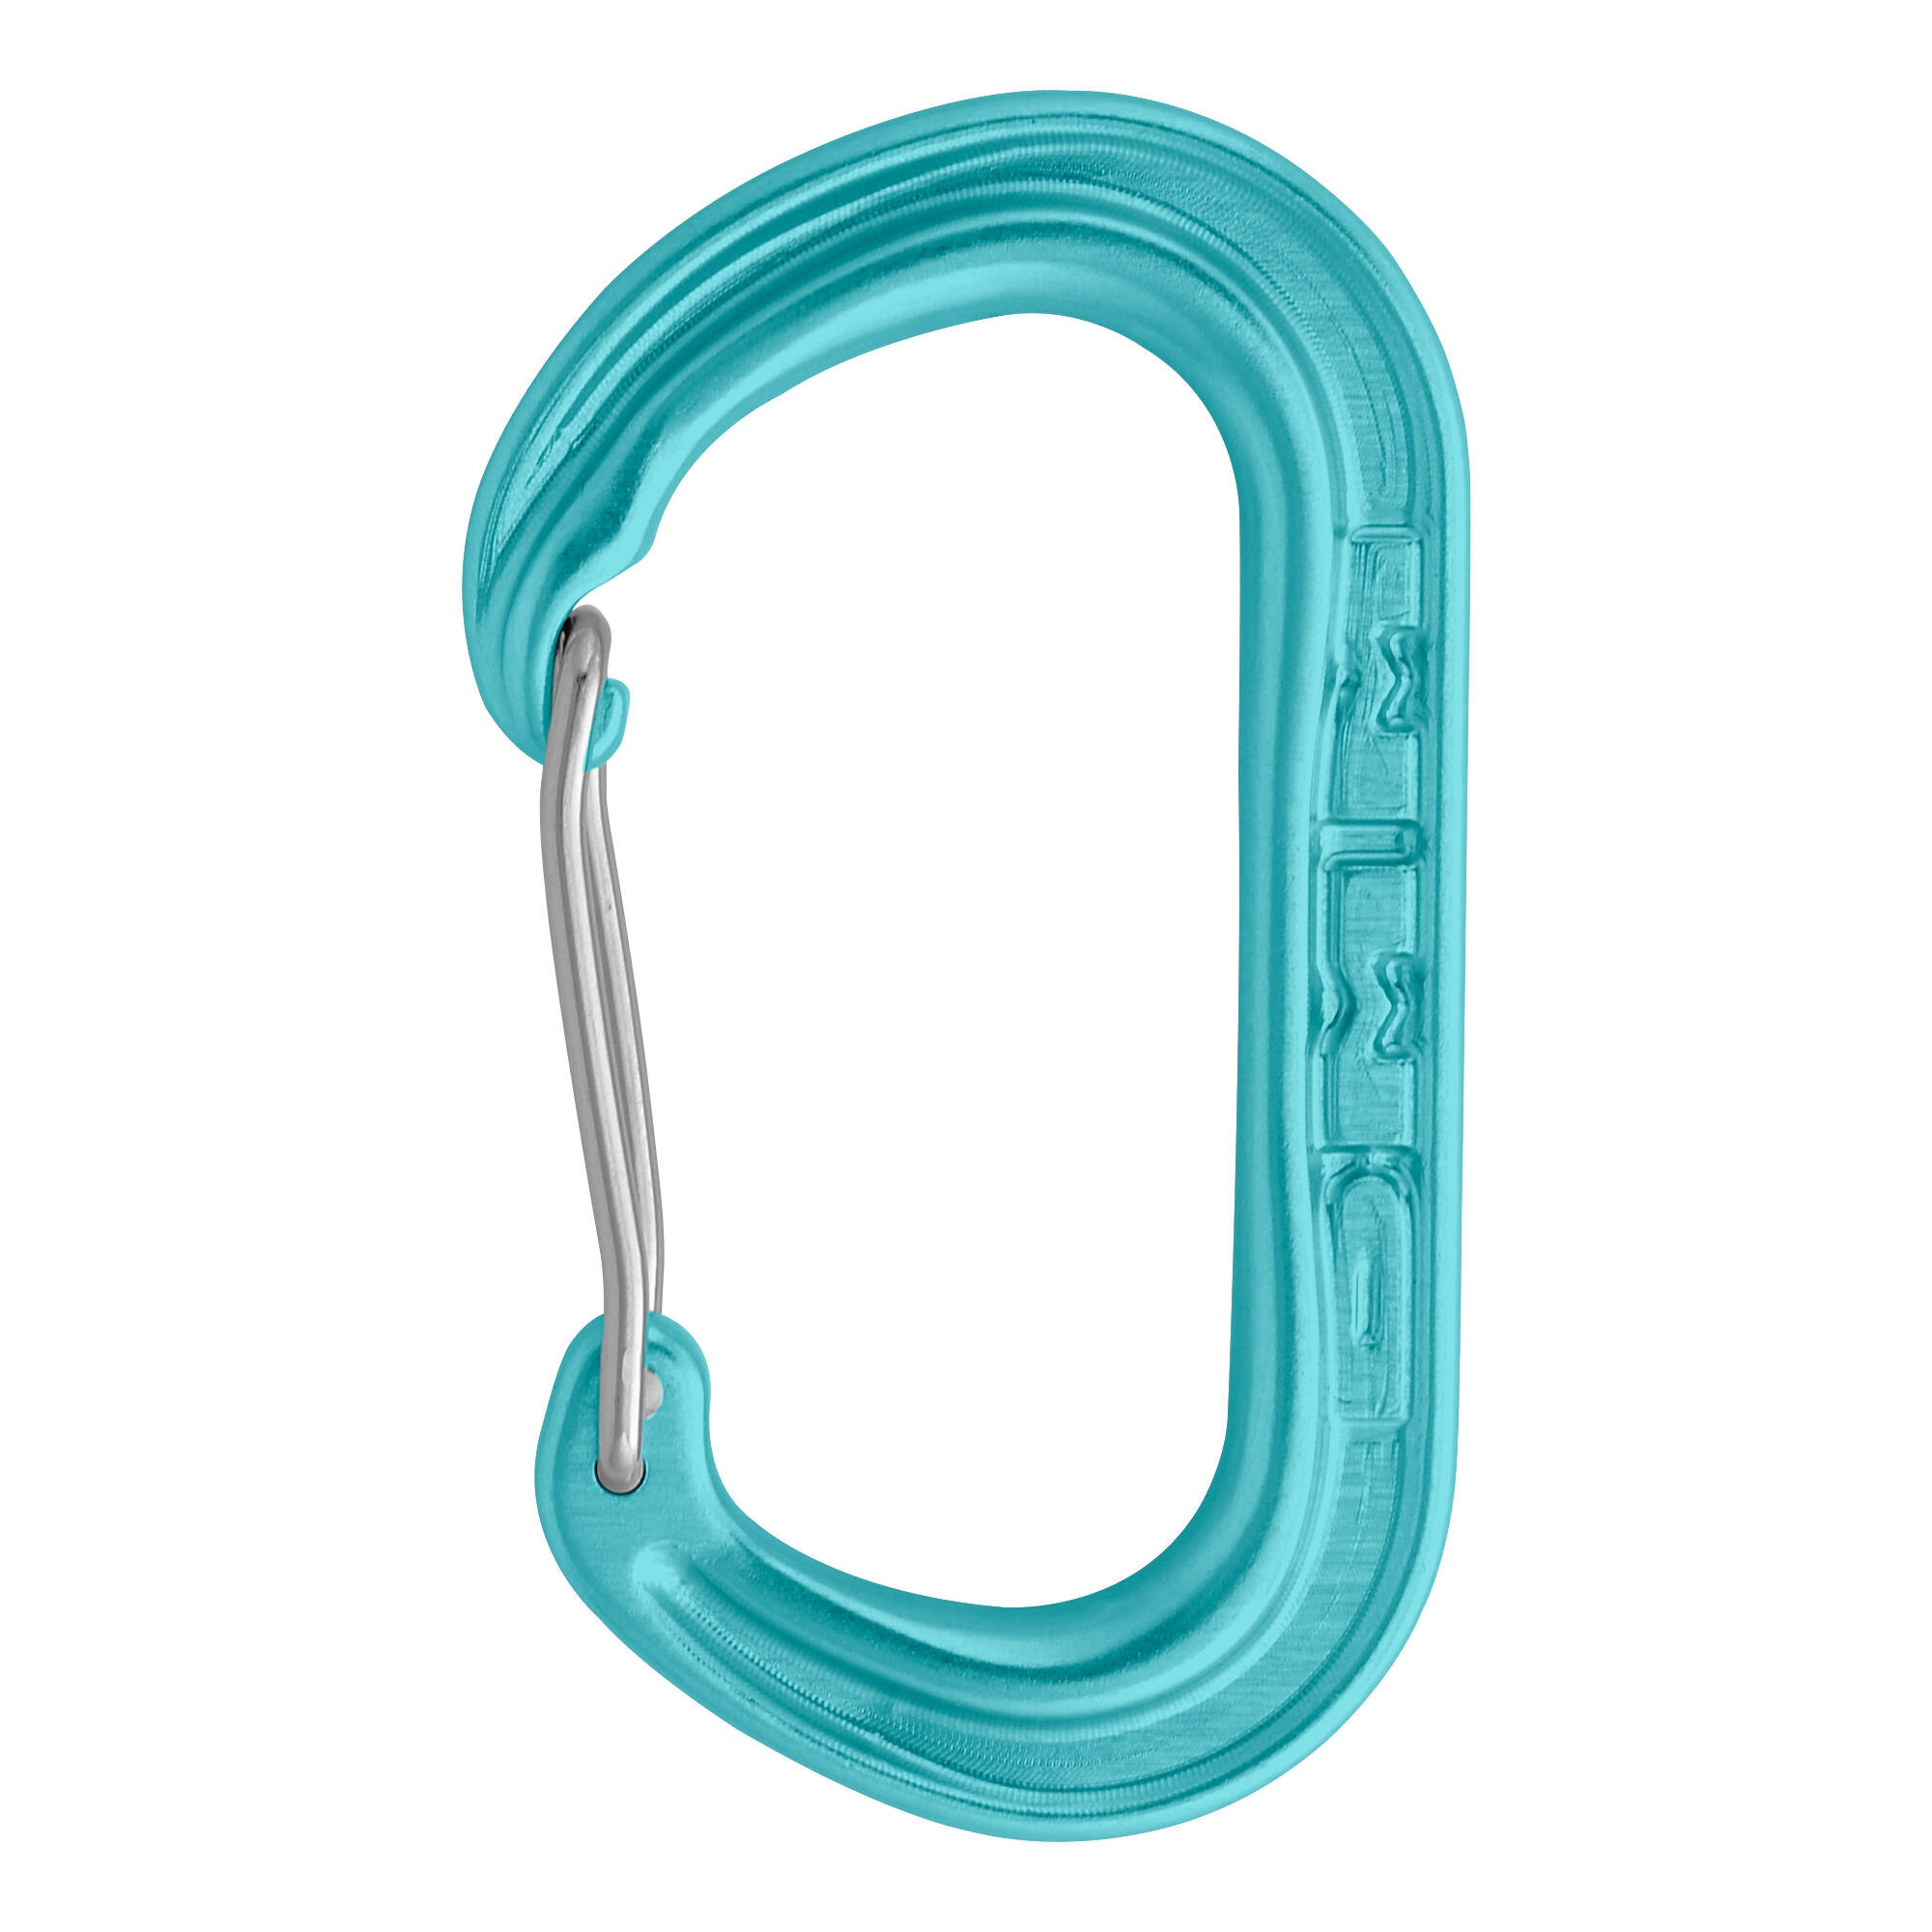 DMM XSRE Wire Accessory Carabiner - Turquoise